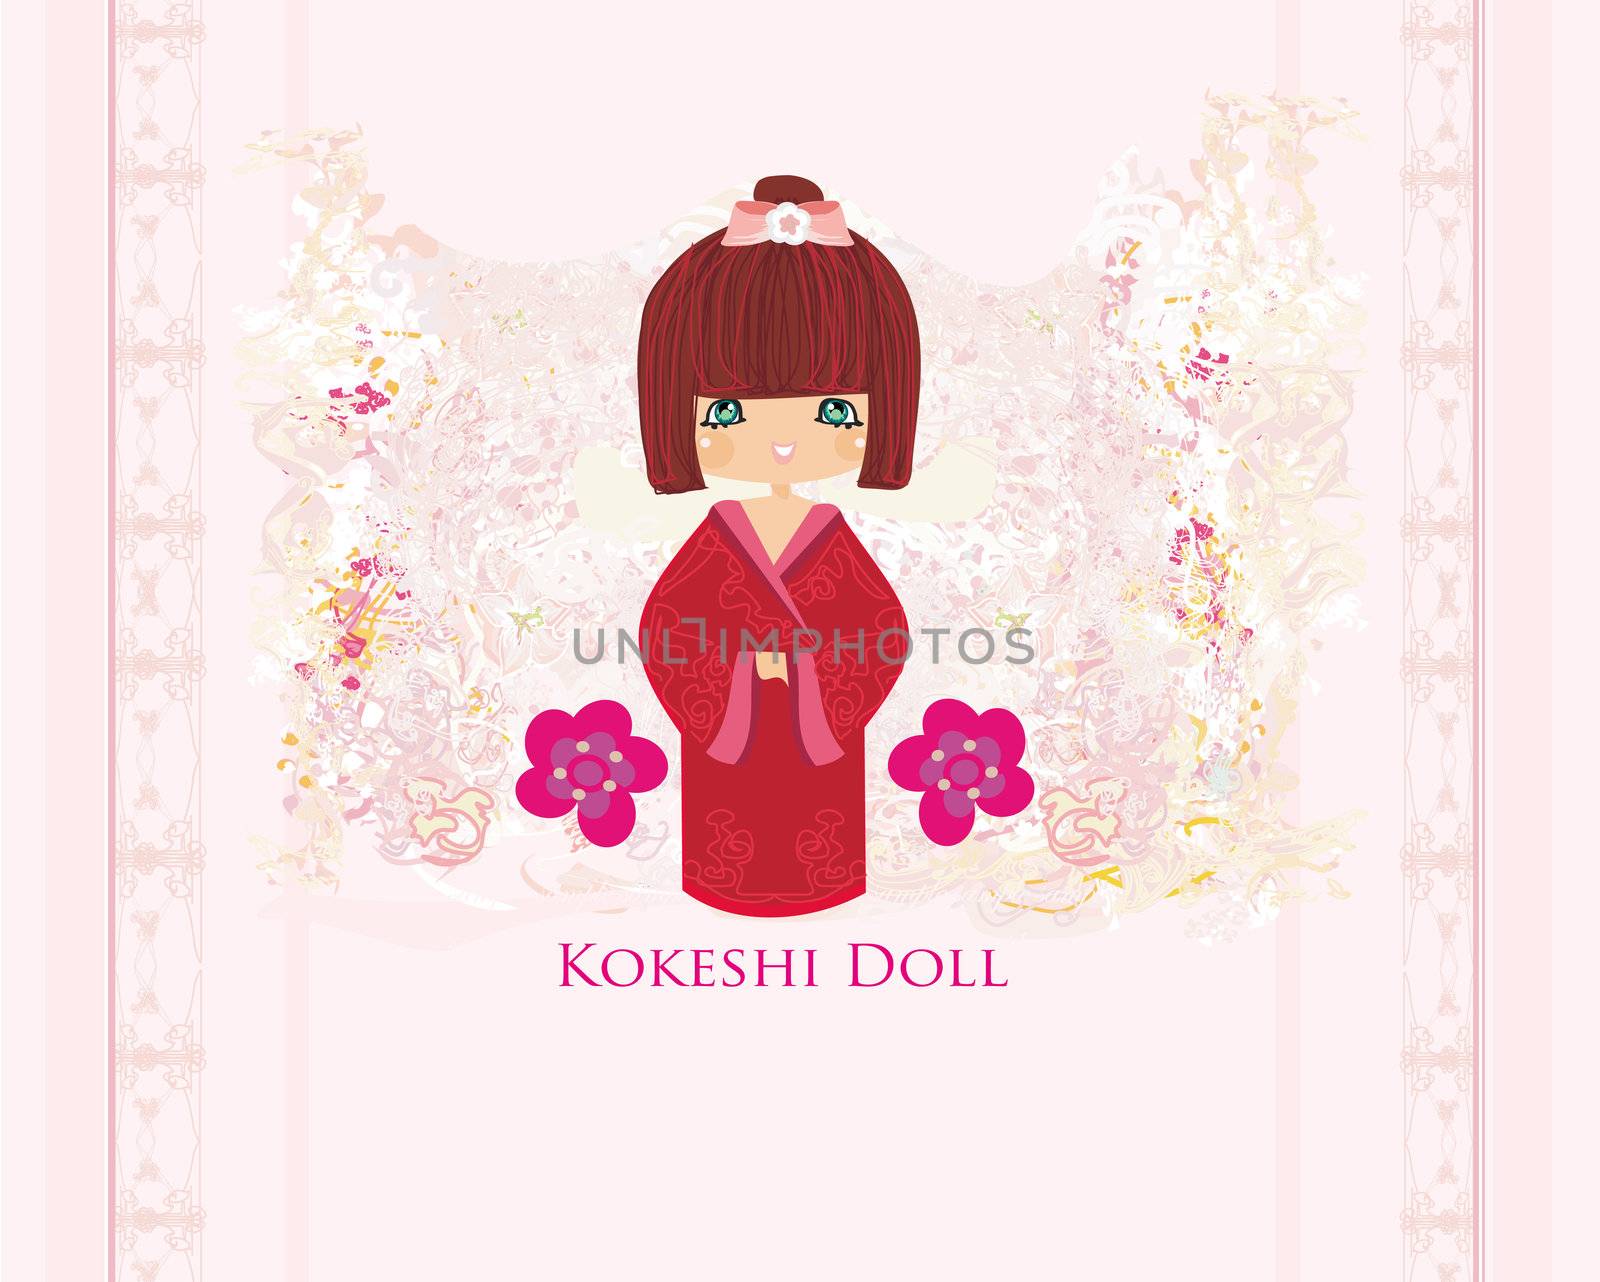 Kokeshi doll on the pink background with floral ornament